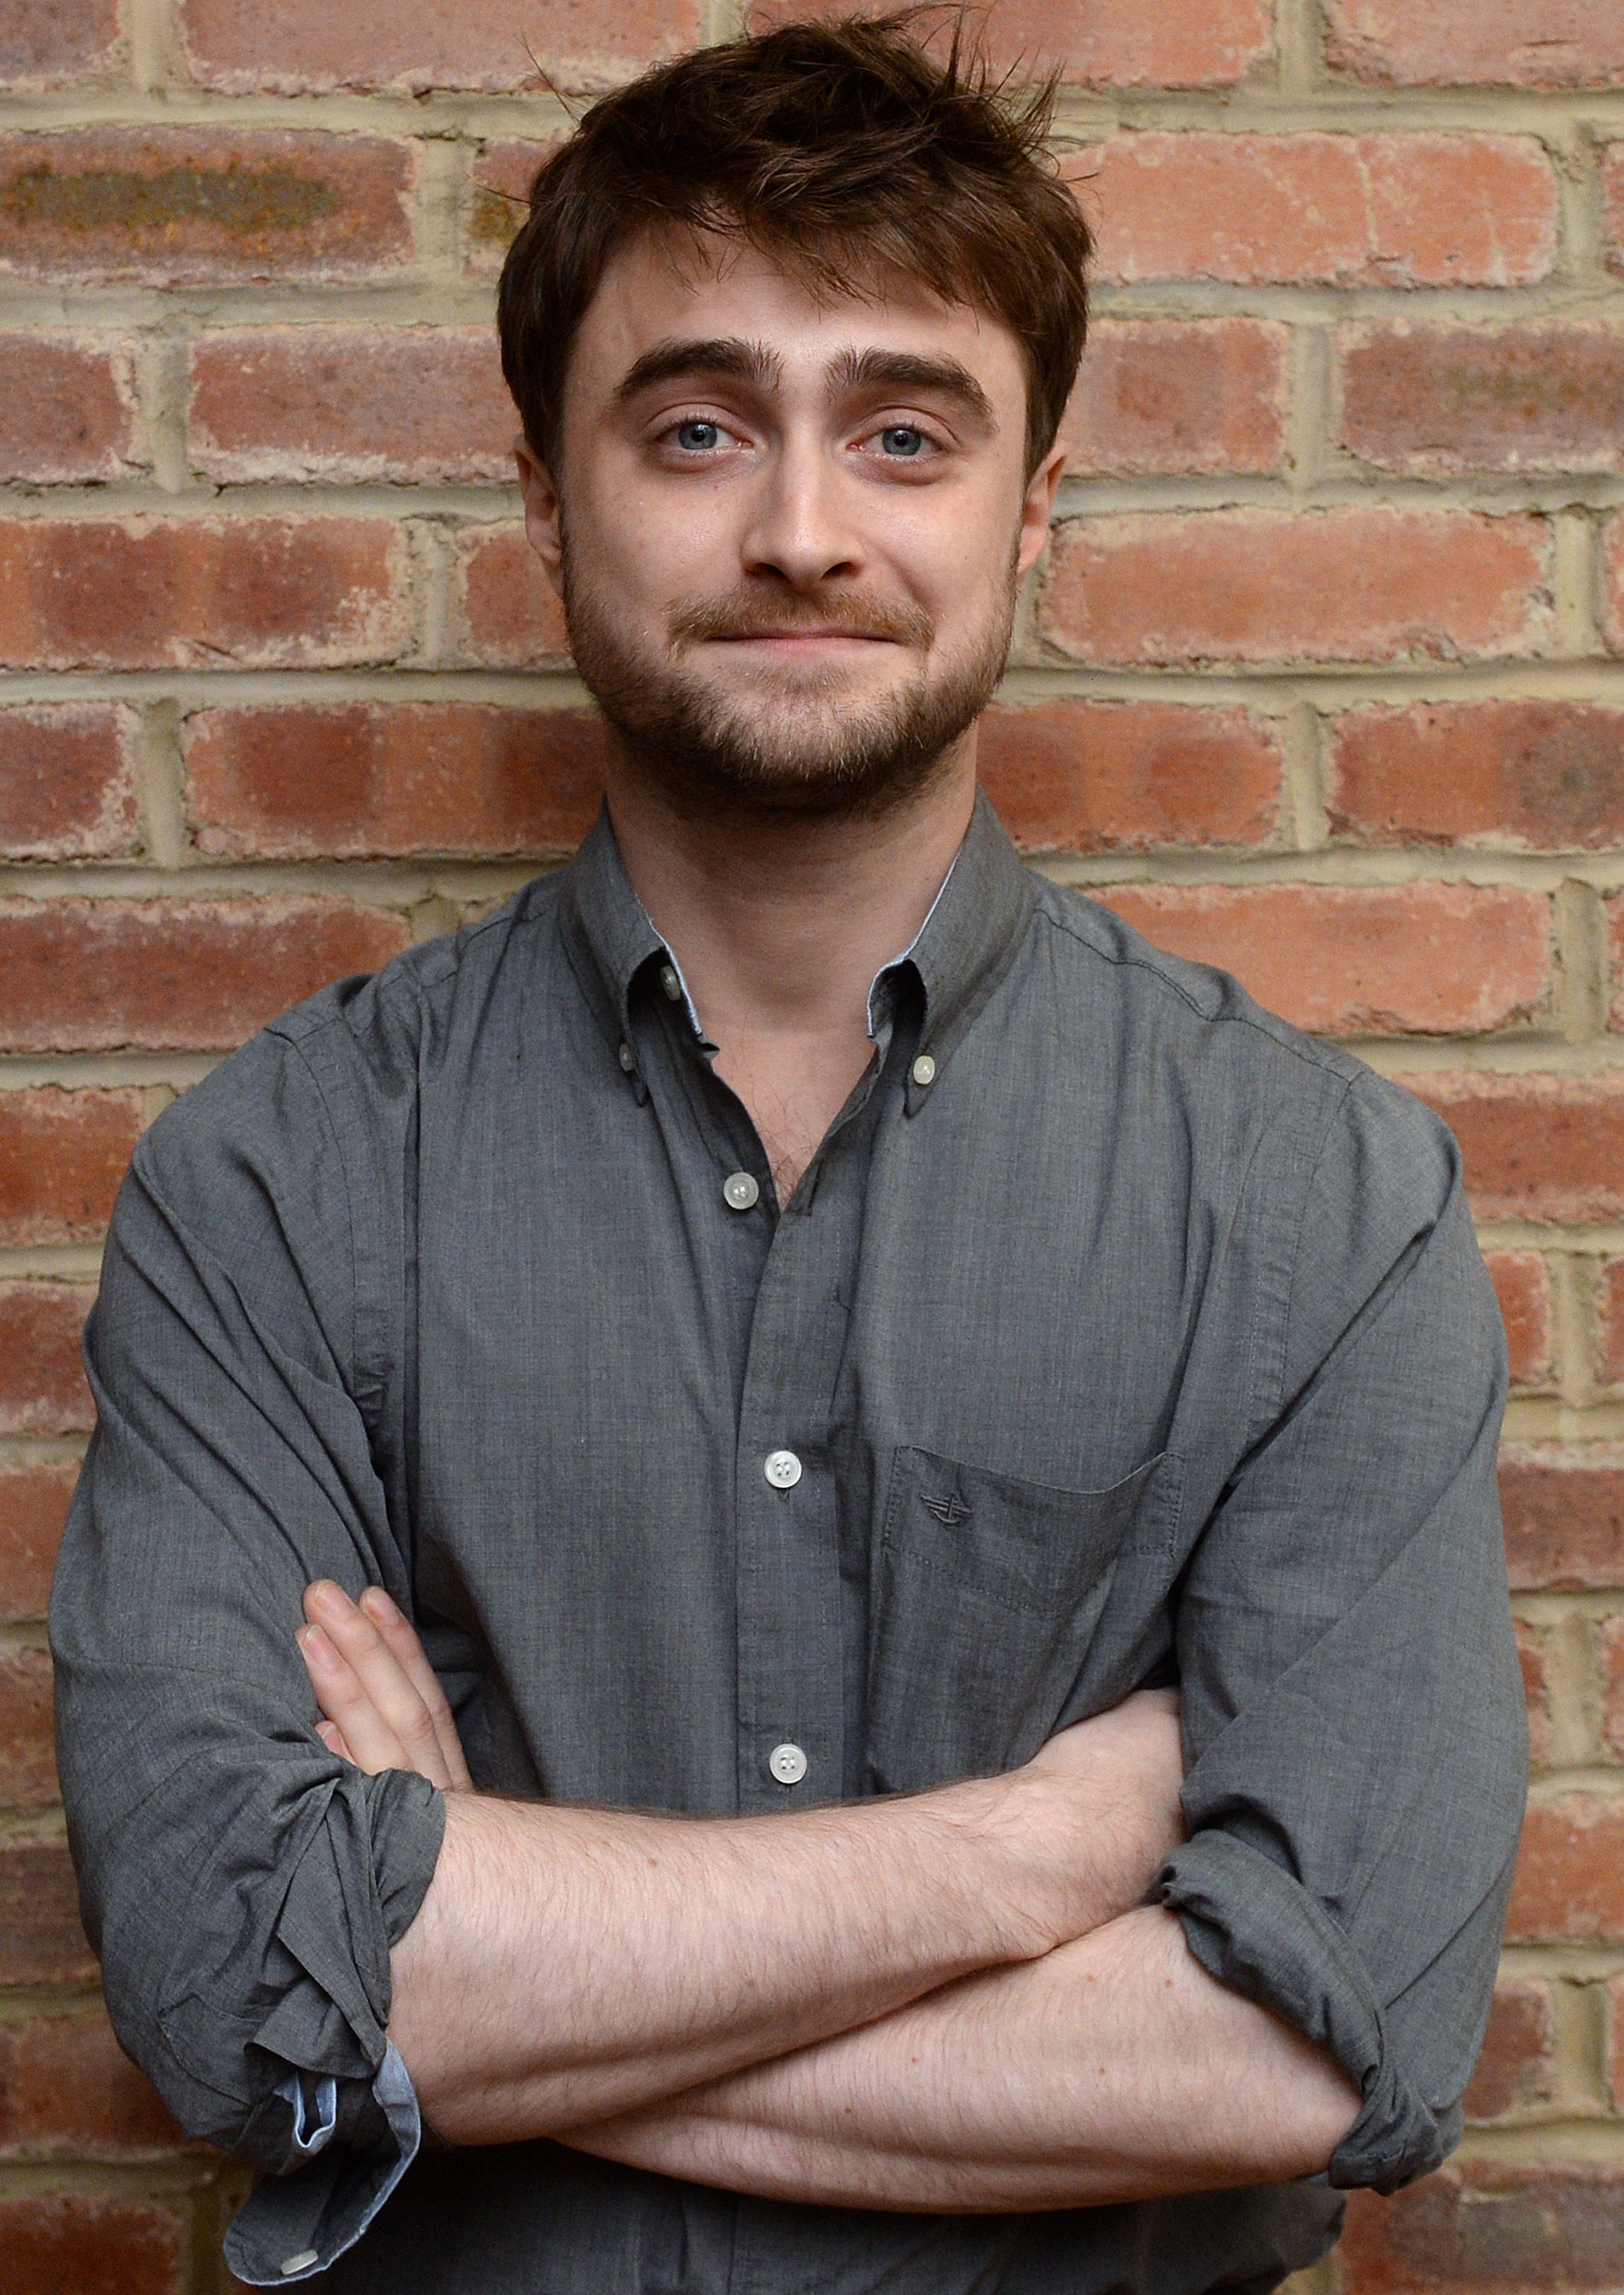 Daniel Radcliffe at AOL London on September 20, 2016, in London, England. | Source: Getty Images